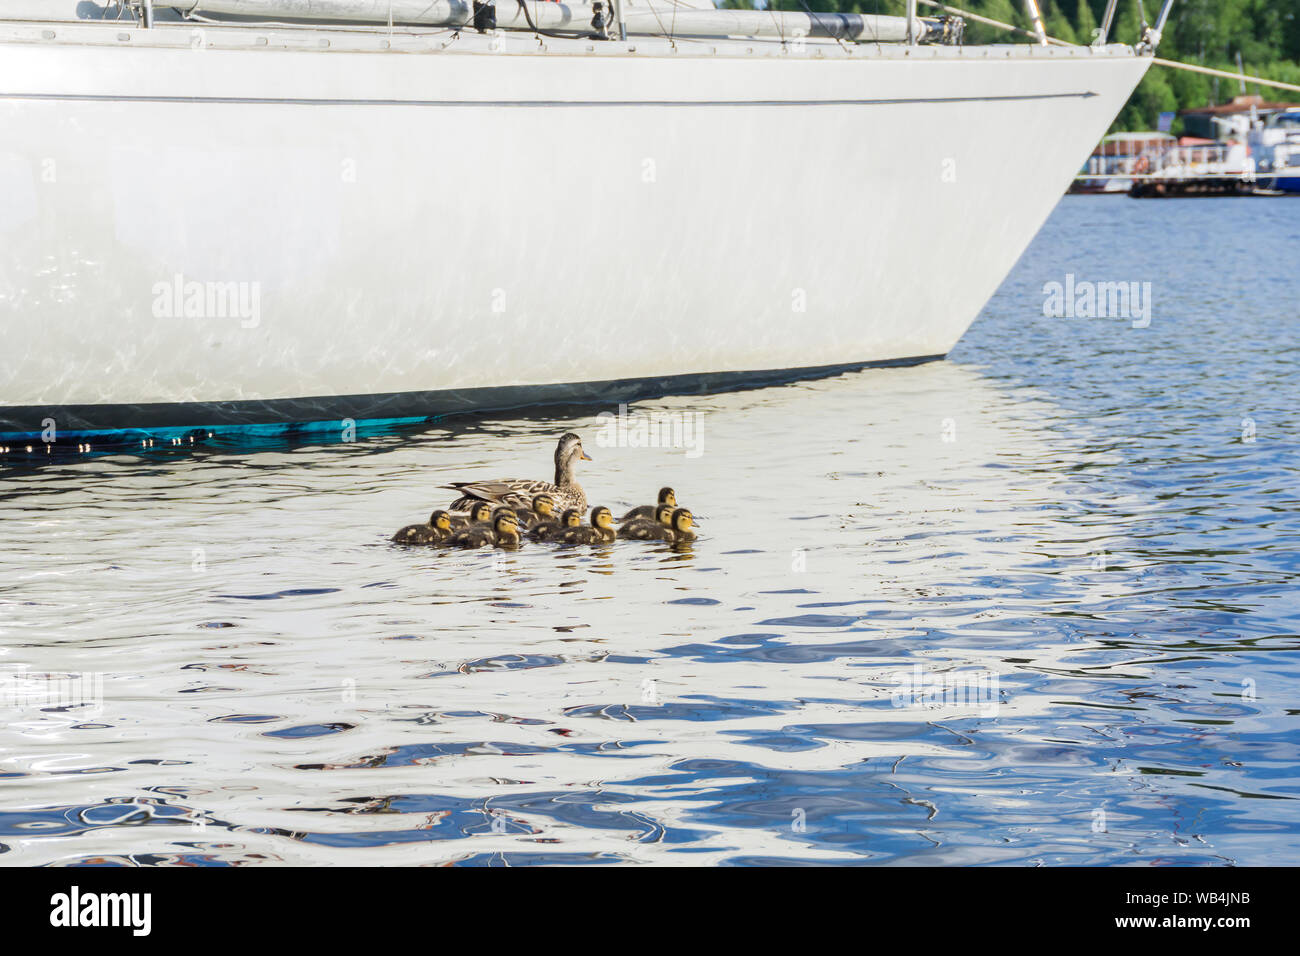 duck with a brood ducklings swim among moored ships in the marina Stock Photo